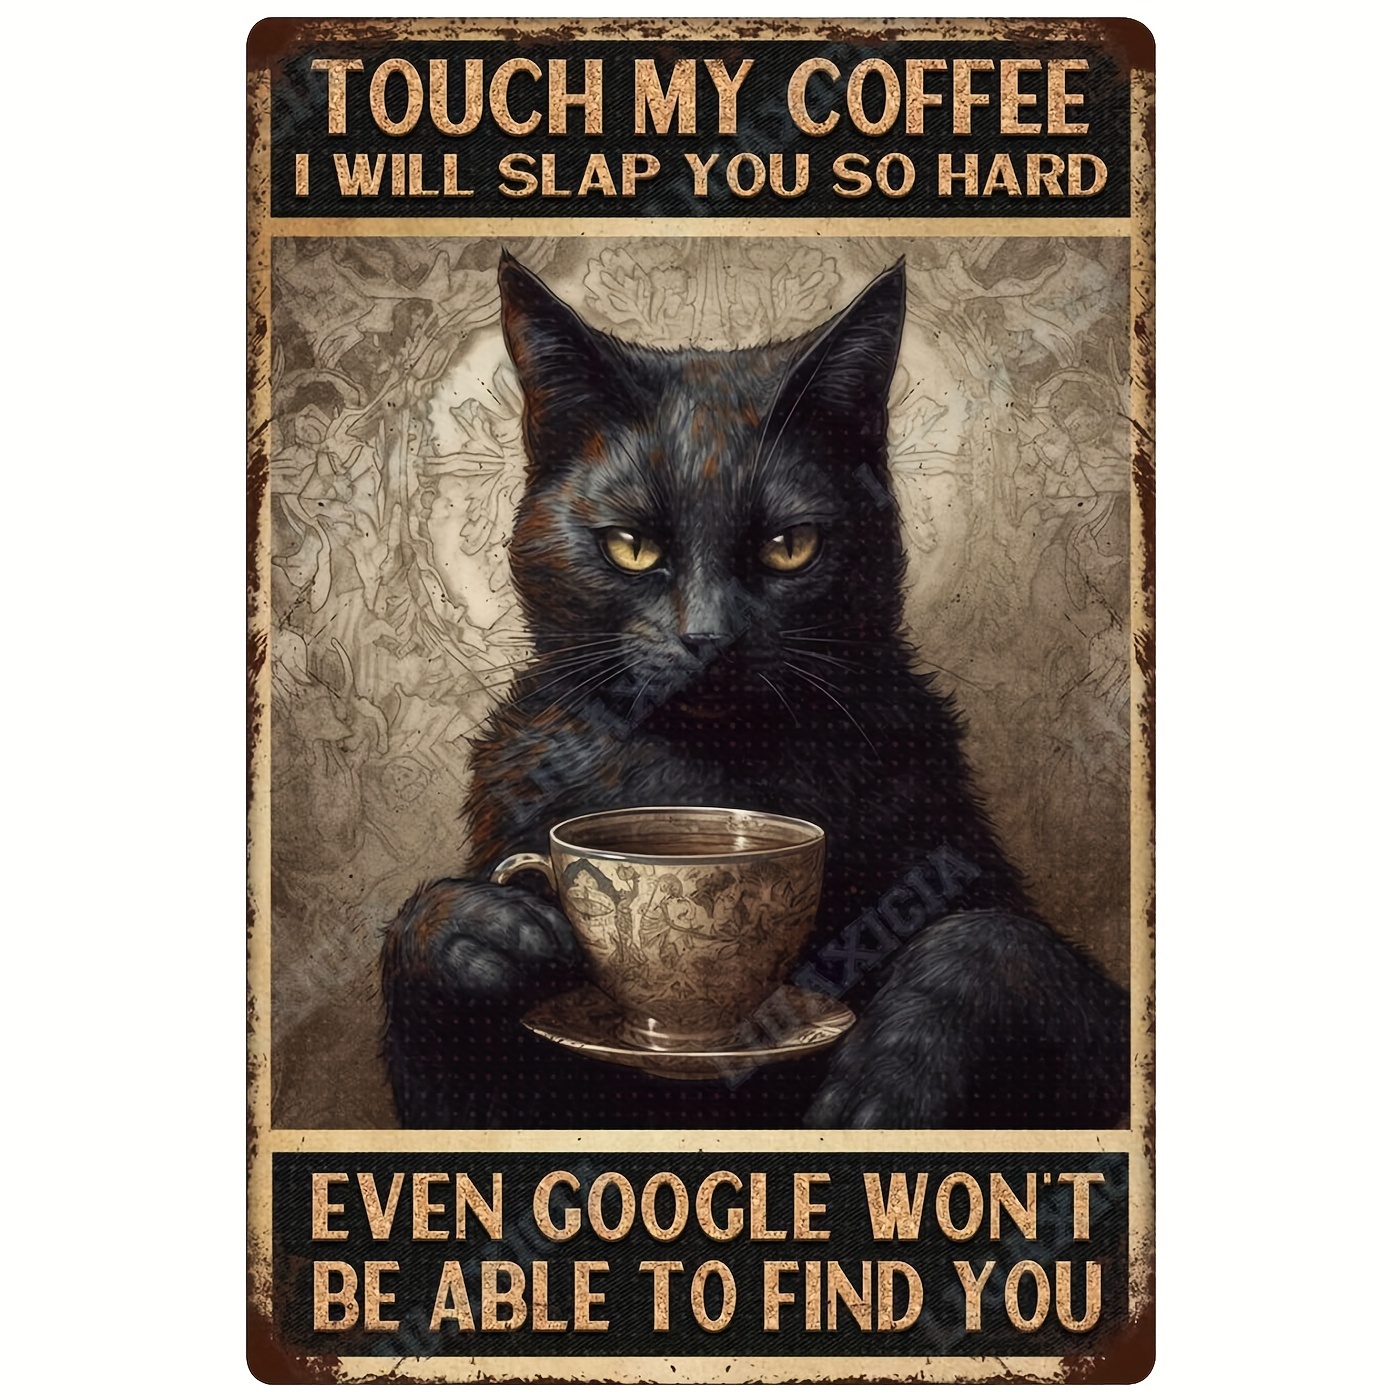 

Metal Signs Vintage Funny Touch My Coffee Black Cat Art Poster Tin Signs For Funny Tin Signs Home Bar Kitchen Decoration Sign 8x12 Inch-tin Sign Black Metal Framed Eid Al-adha Mubarak